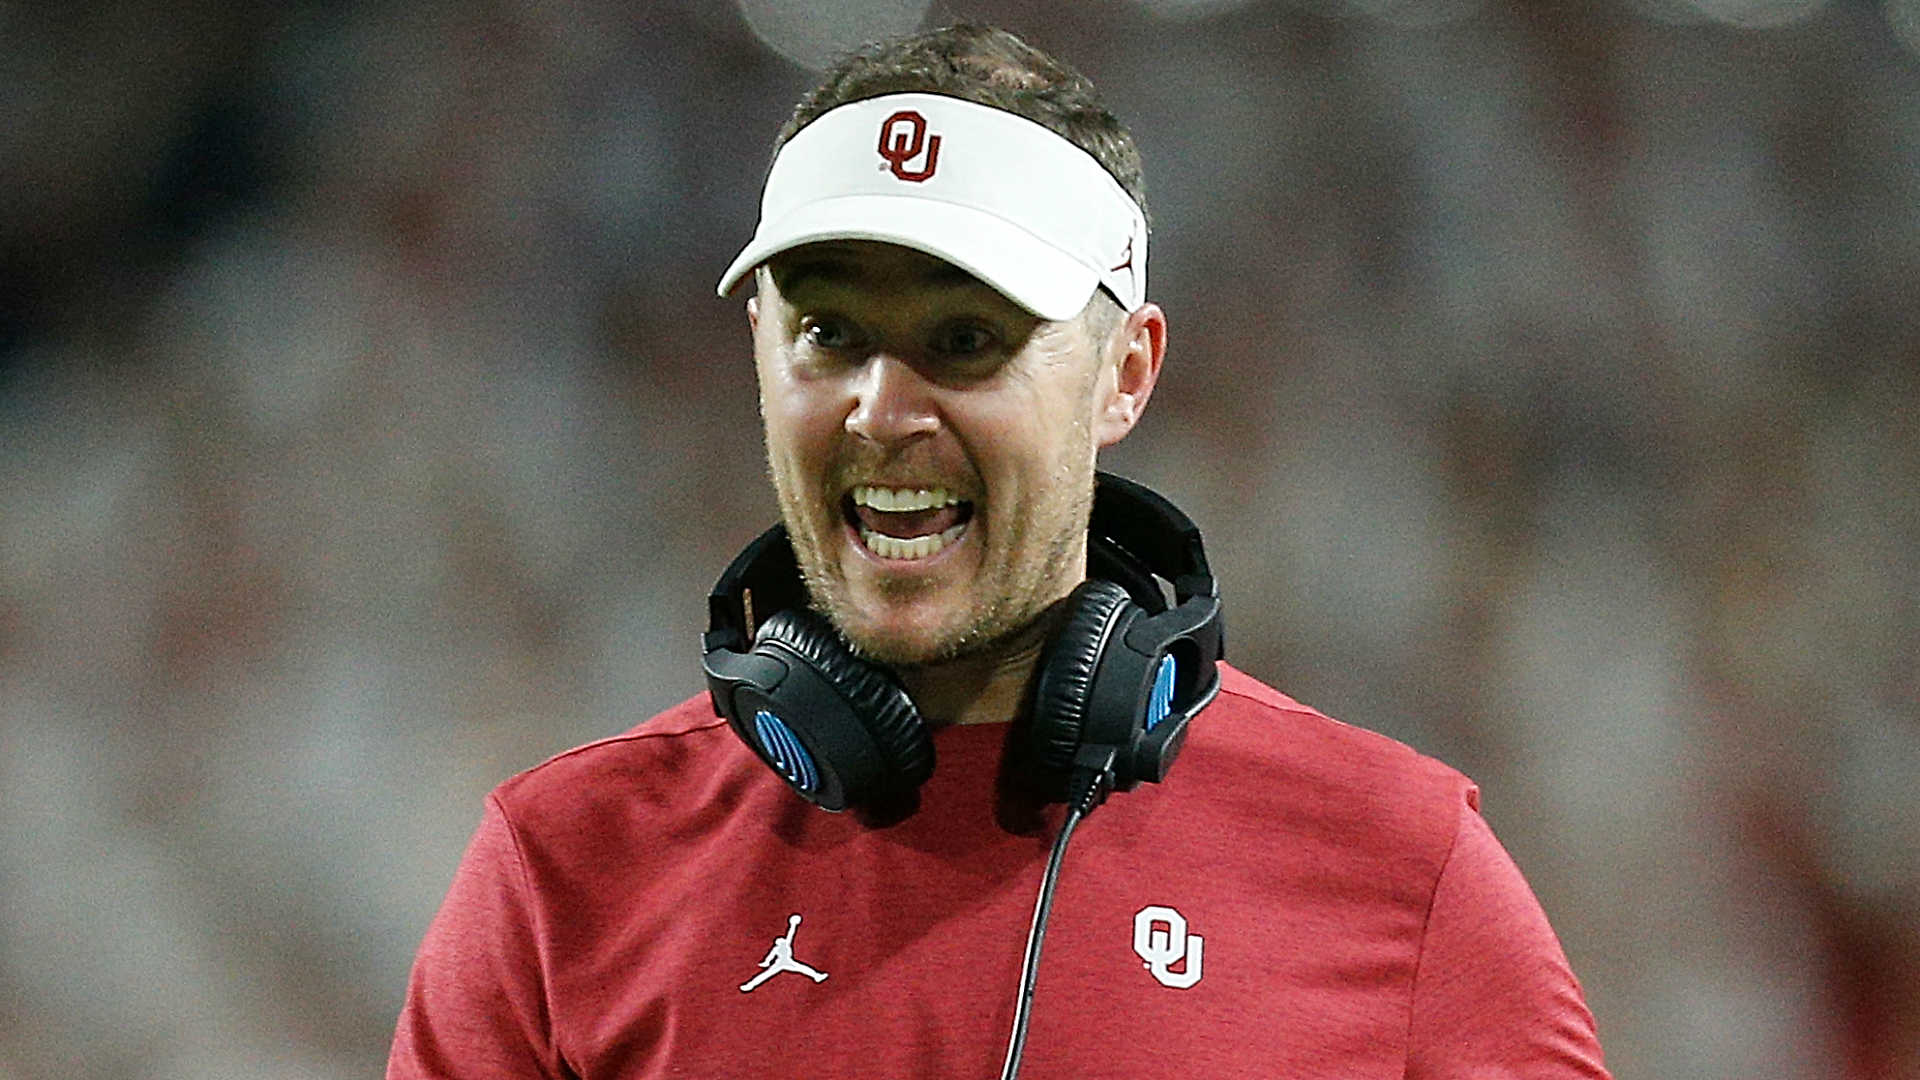 'The world is going to need football': Lincoln Riley keeps an open mind about 2020 season